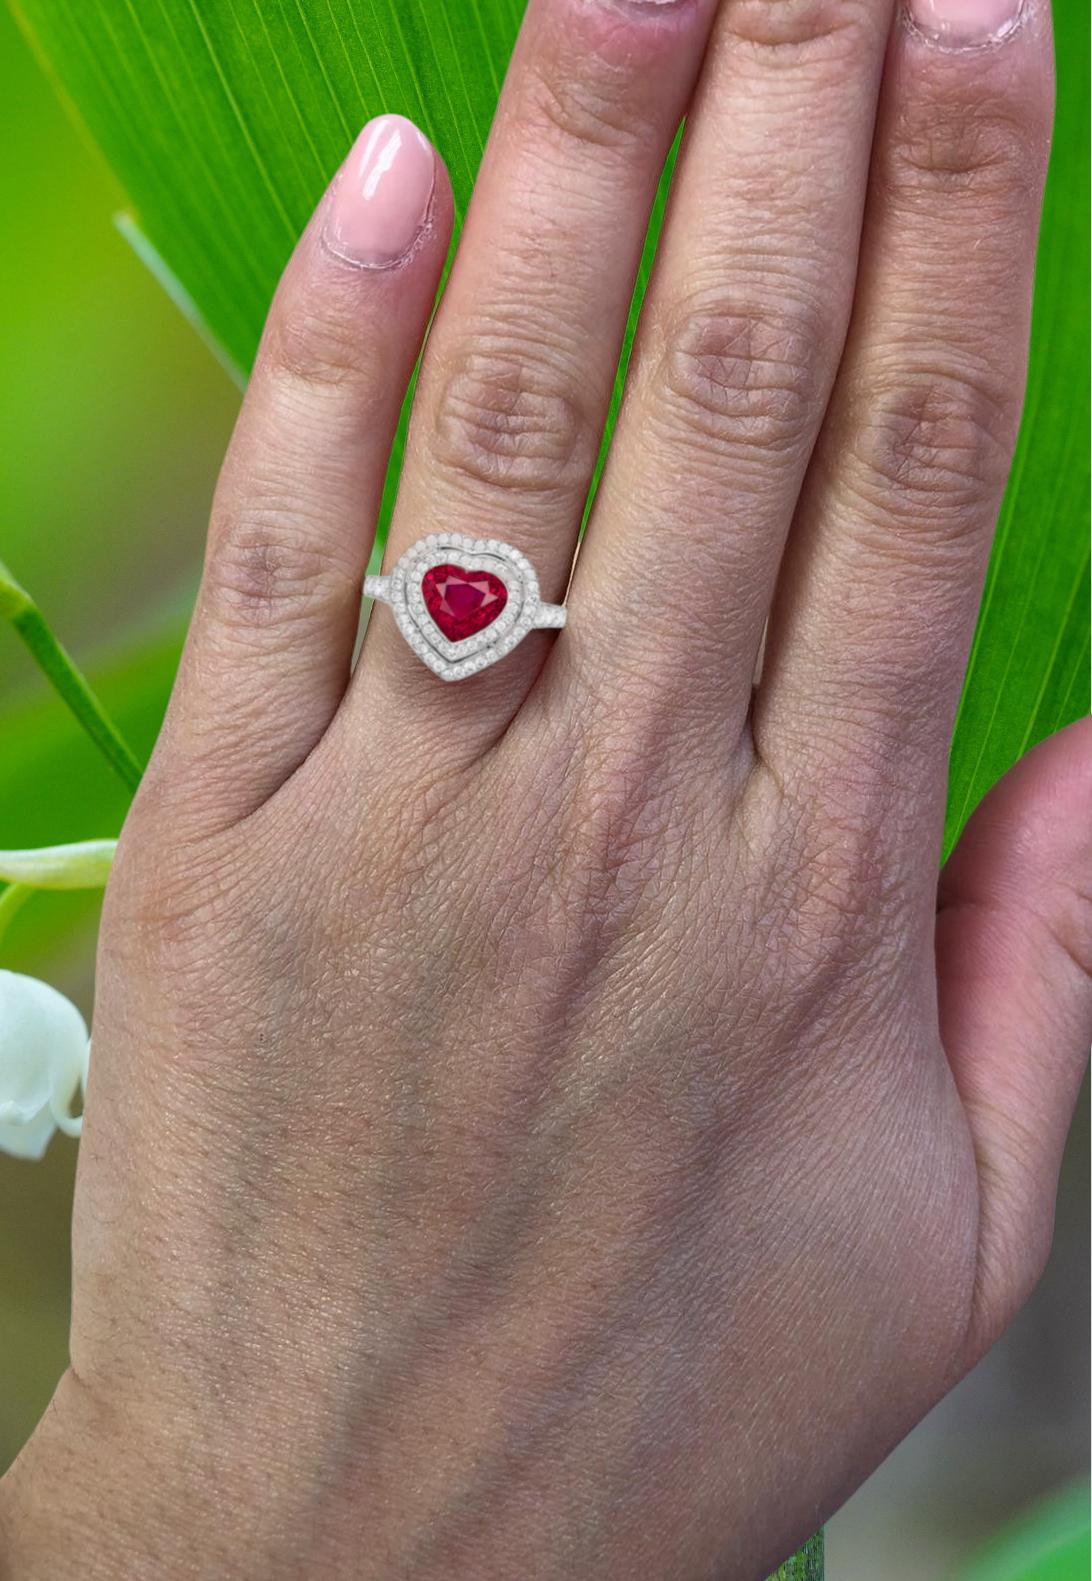  exquisite 3.02 carat heart-shaped natural ruby, sourced from the renowned Montepuez region in Mozambique. This gemstone, a marvel of nature, boasts unparalleled brilliance and allure.

Meticulously crafted with precision, the faceted cut of this